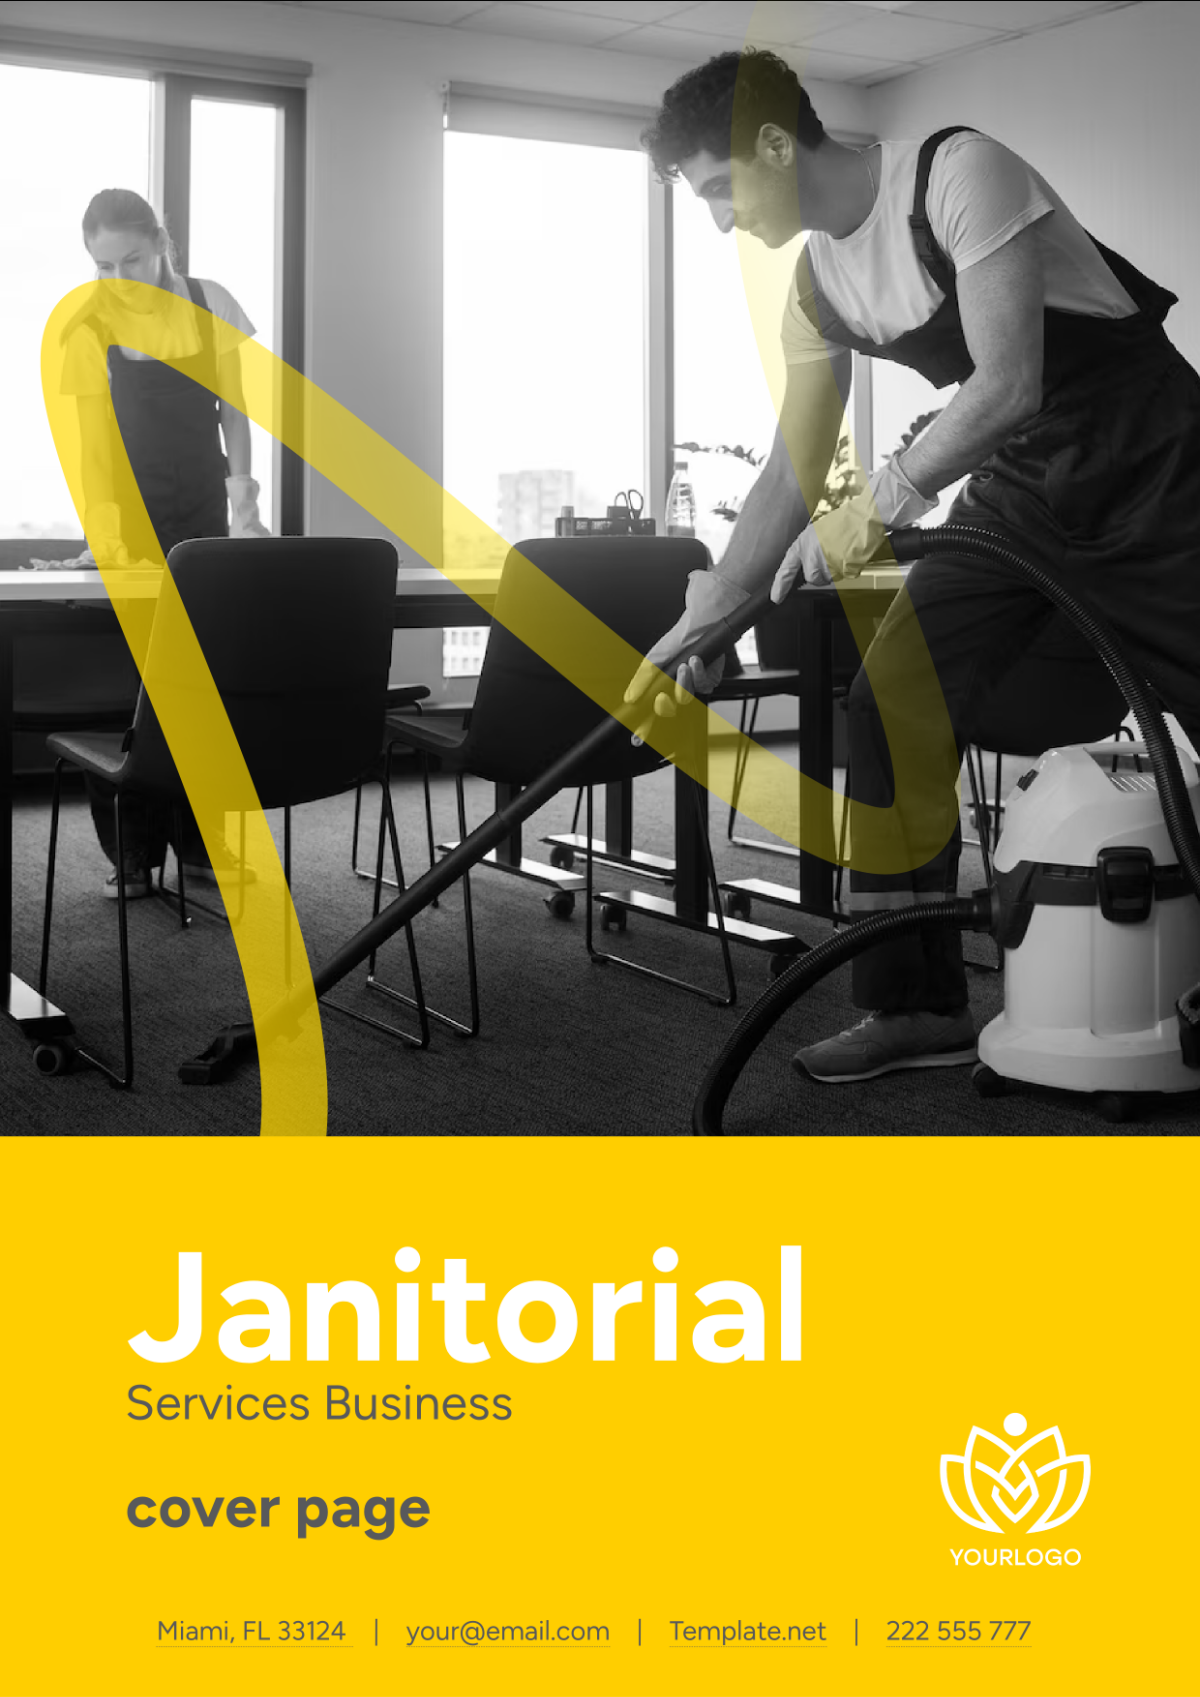 Janitorial Services Business Cover Page